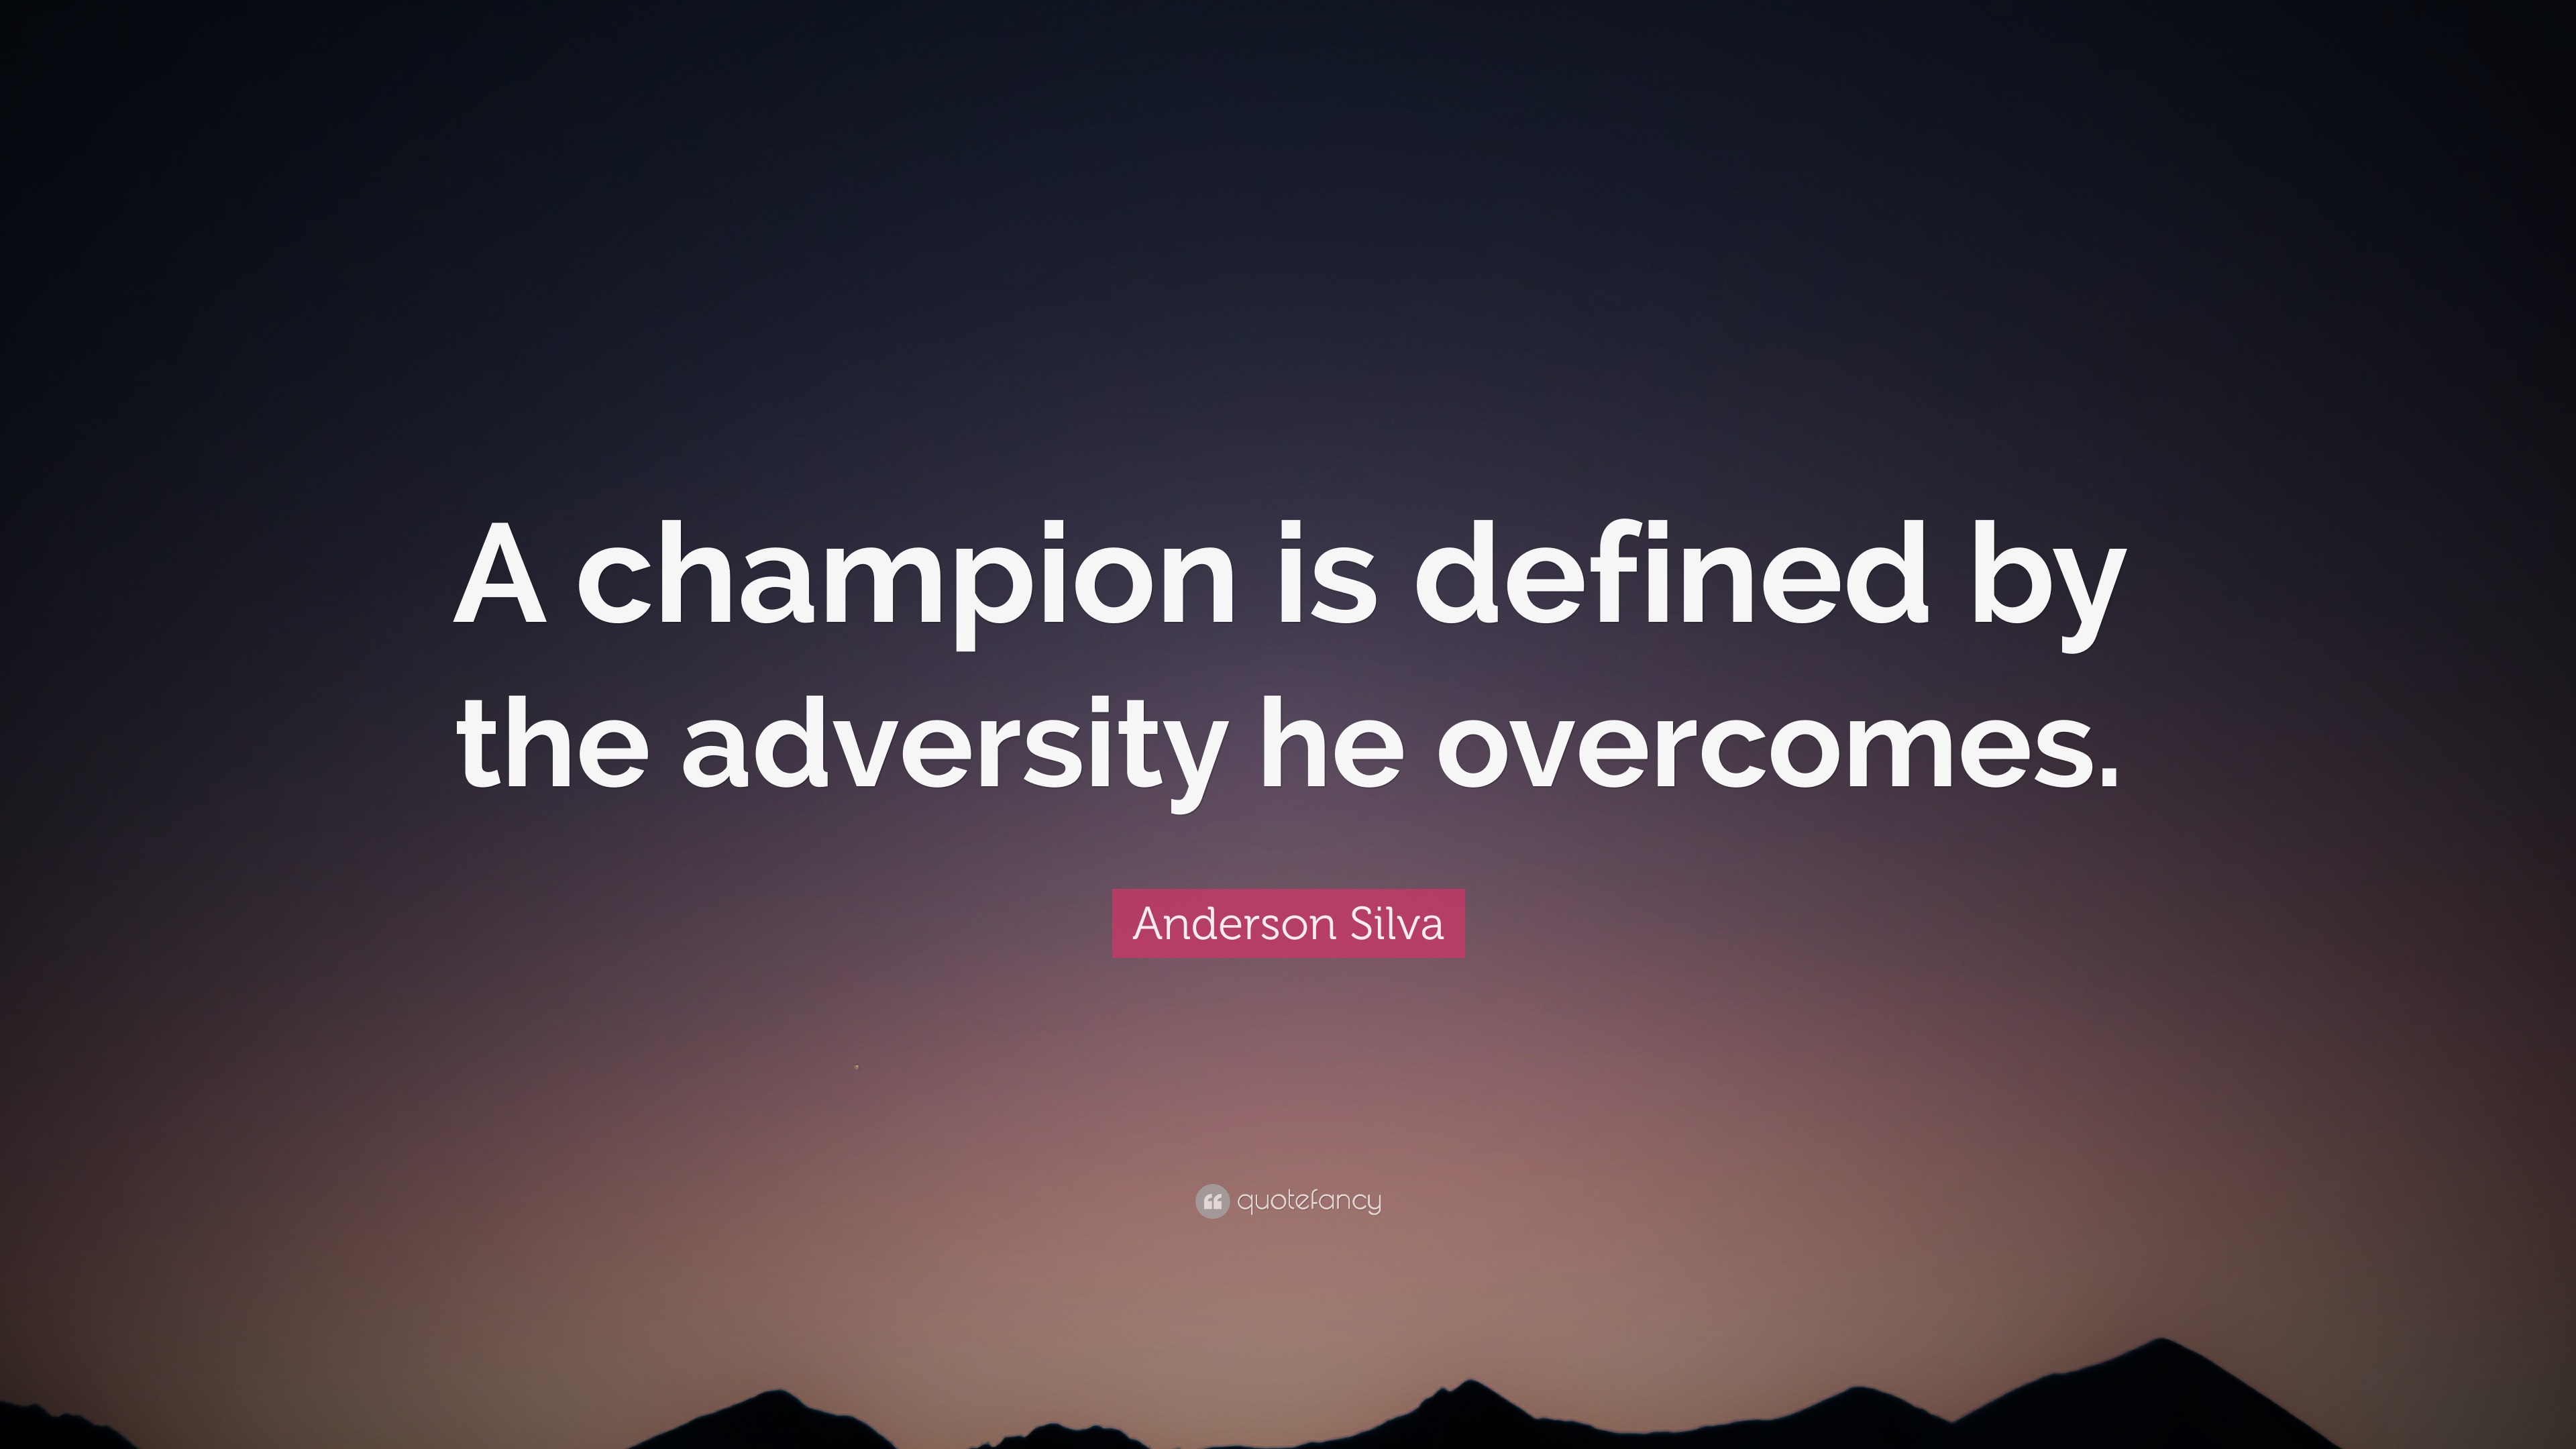 Forsøg Cape cyklus Anderson Silva Quote: “A champion is defined by the adversity he overcomes.”